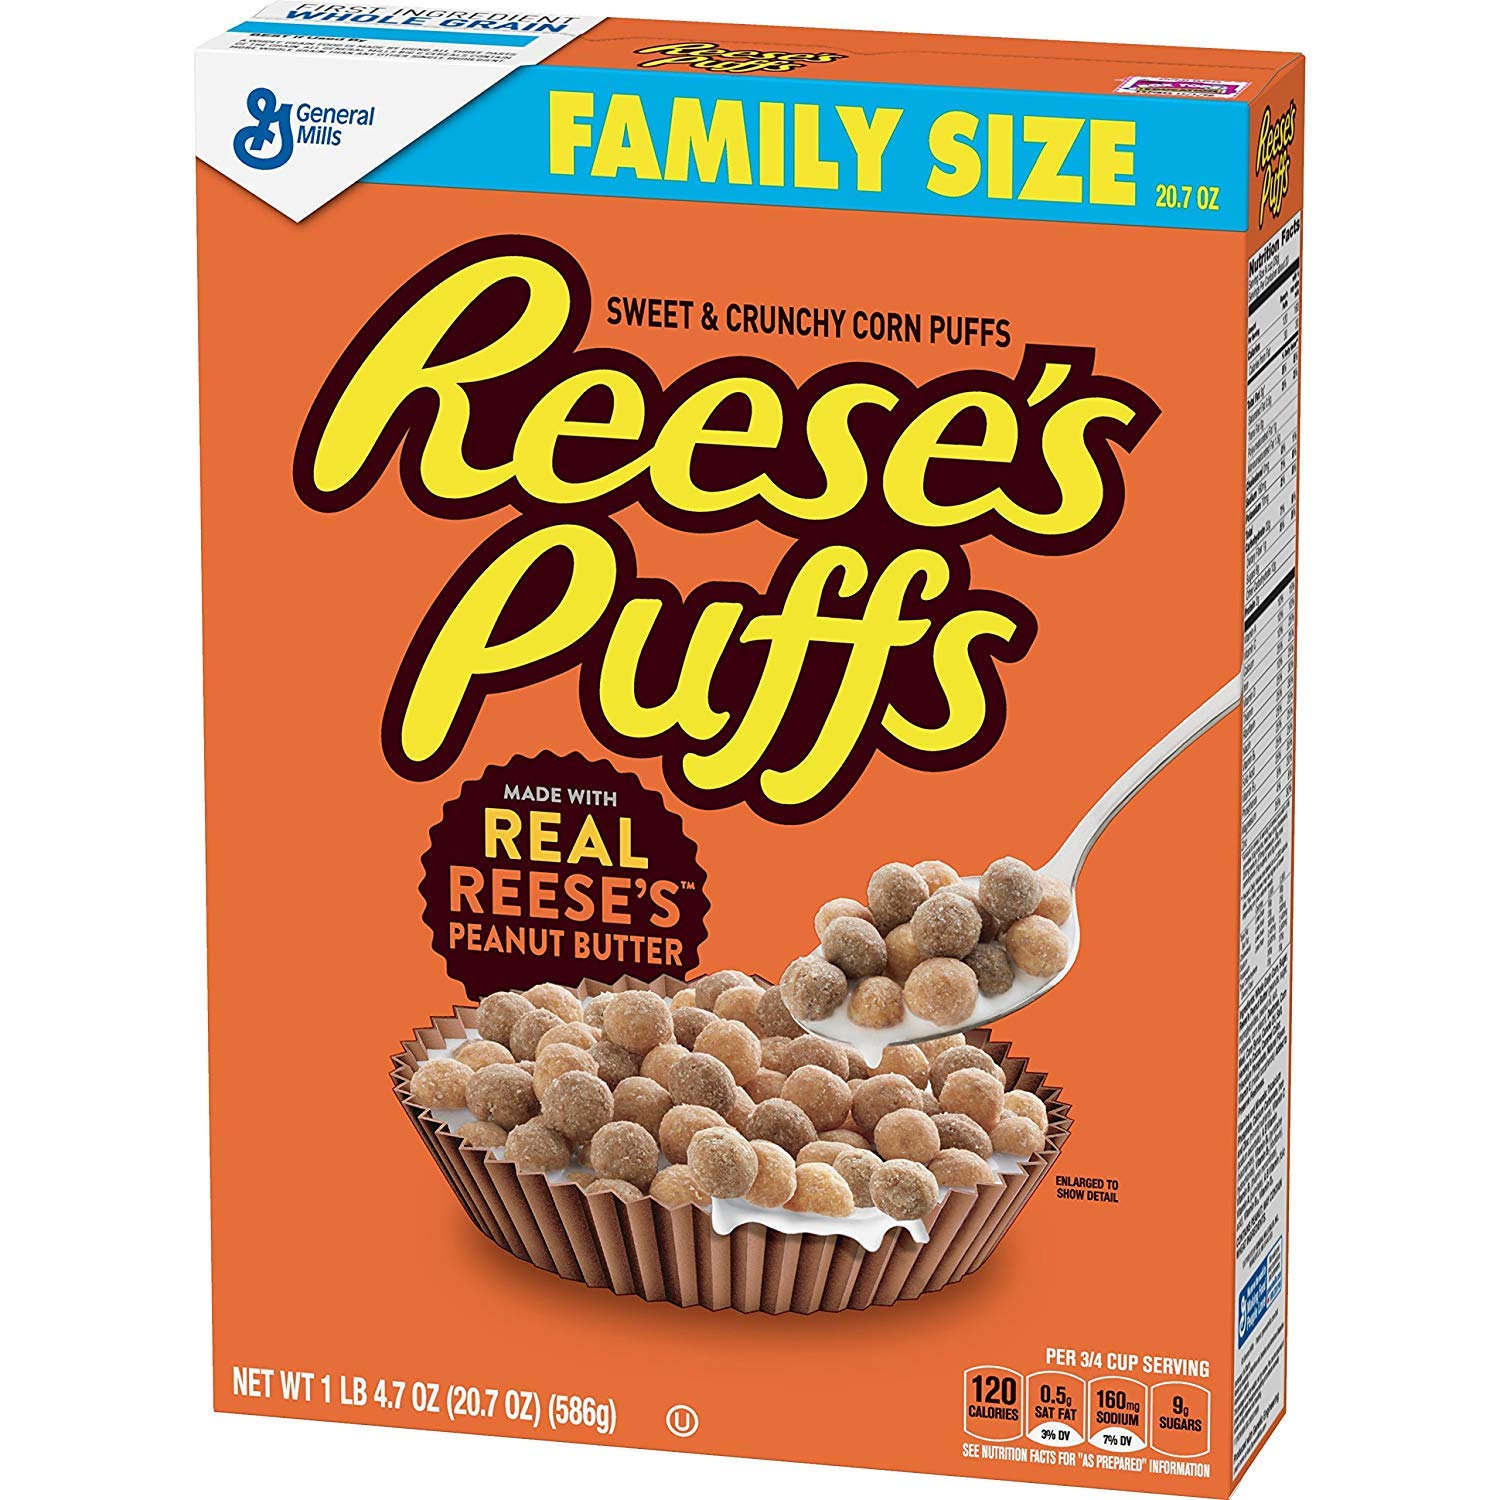 Reese's Puffs Family Size